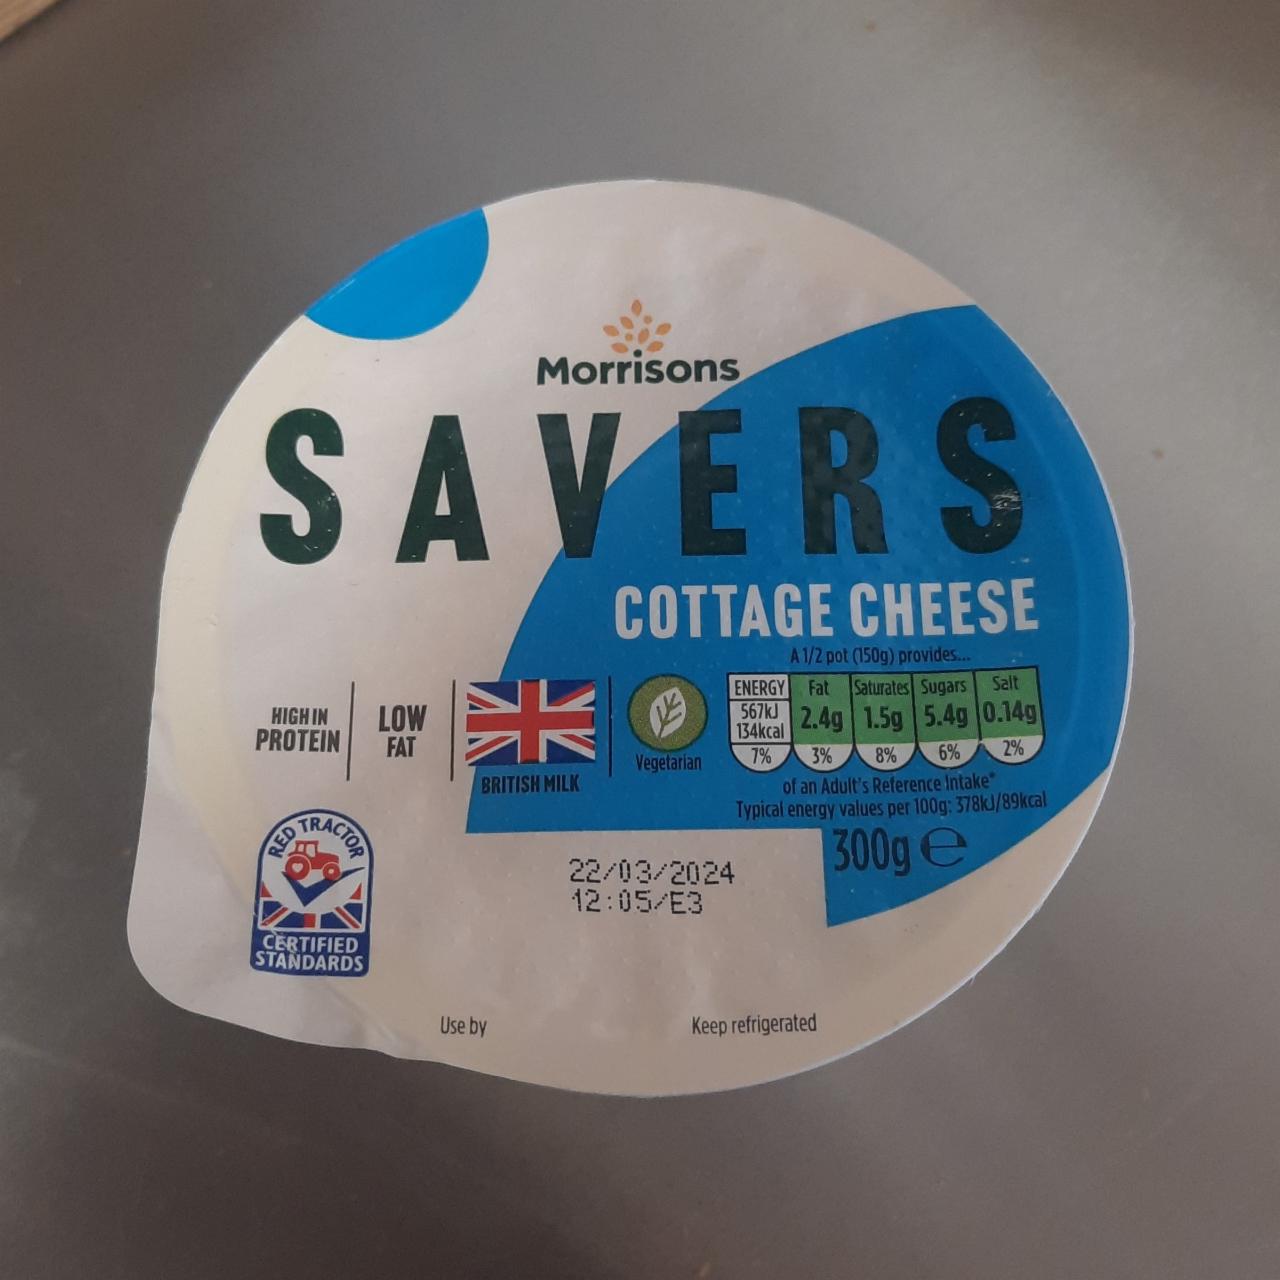 Fotografie - Savers Cottage Cheese Morrisons